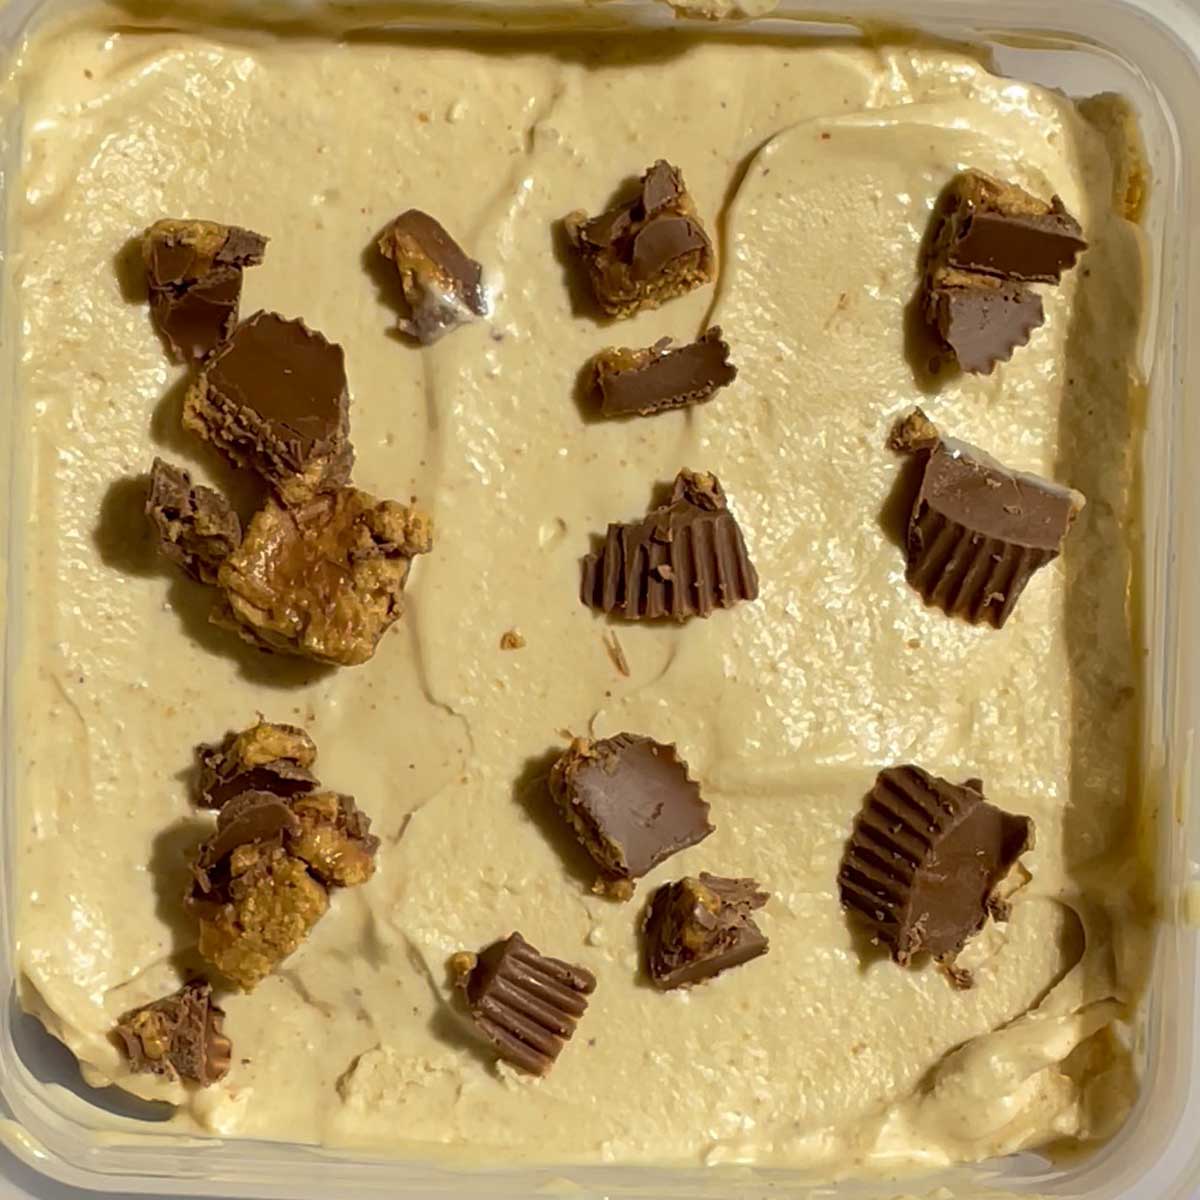 Peanut butter ice cream ready to freeze.